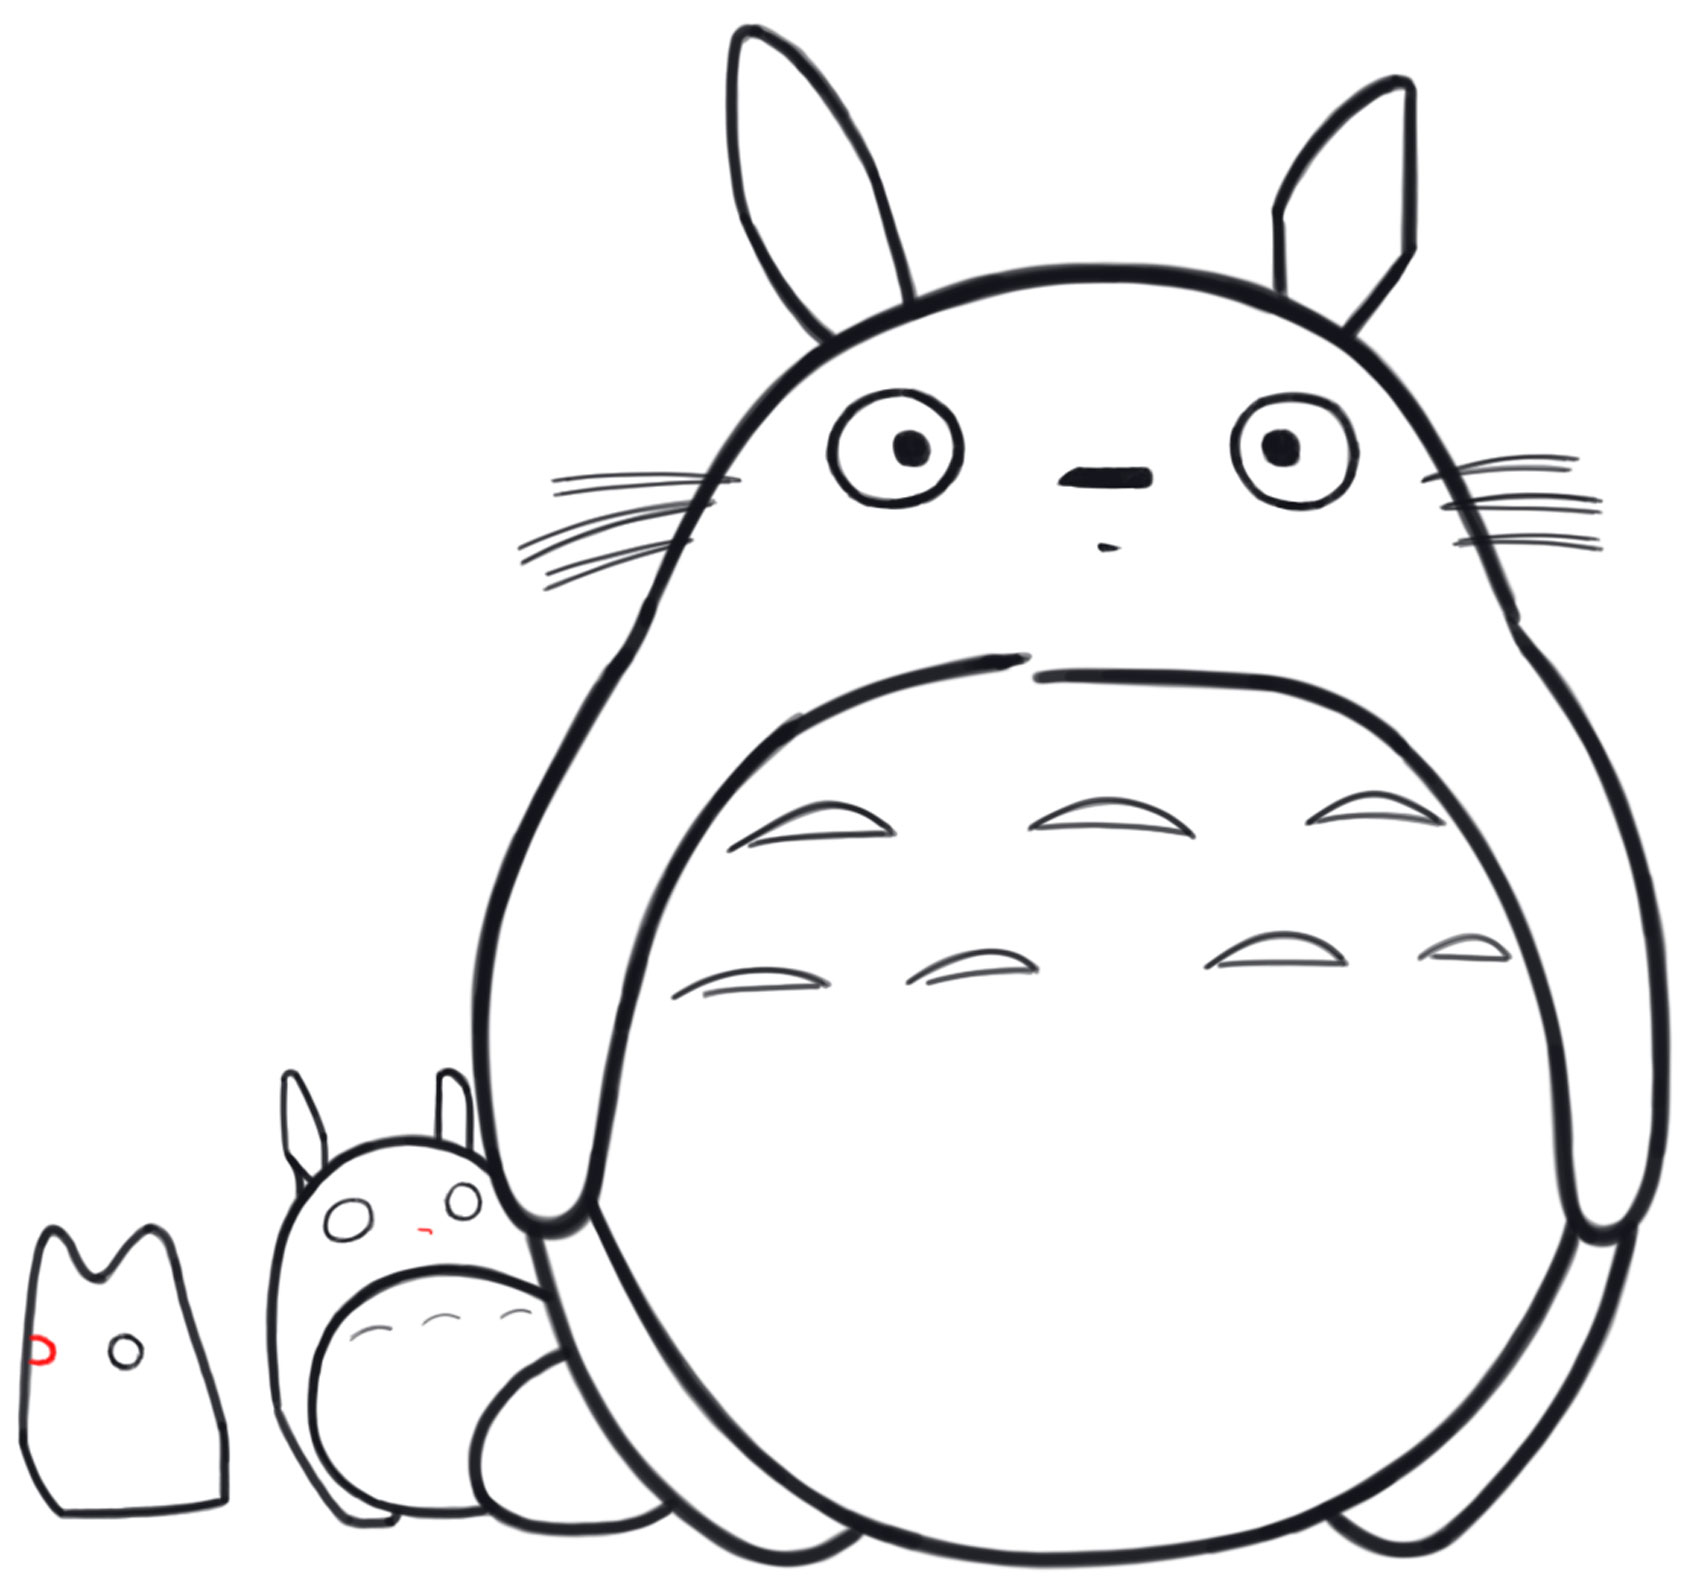 How To Draw Totoro And Baby Mini Tototoros White And Light Blue How To Draw Step By Step Drawing Tutorials